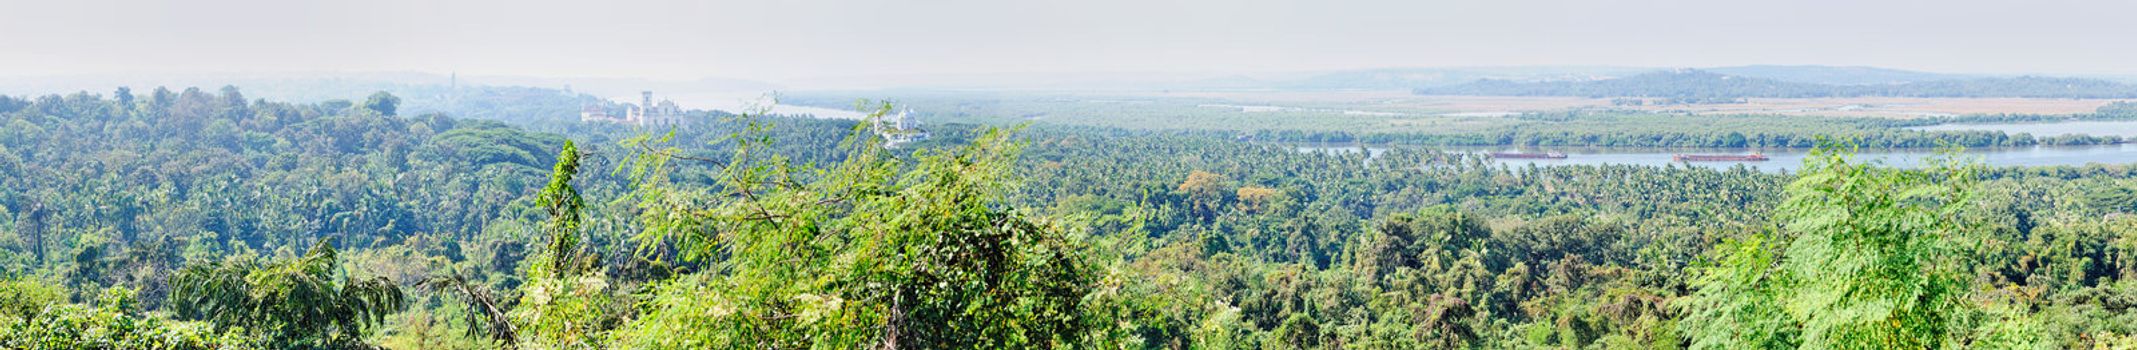 Panoramic view of tropical forest in Goa, India